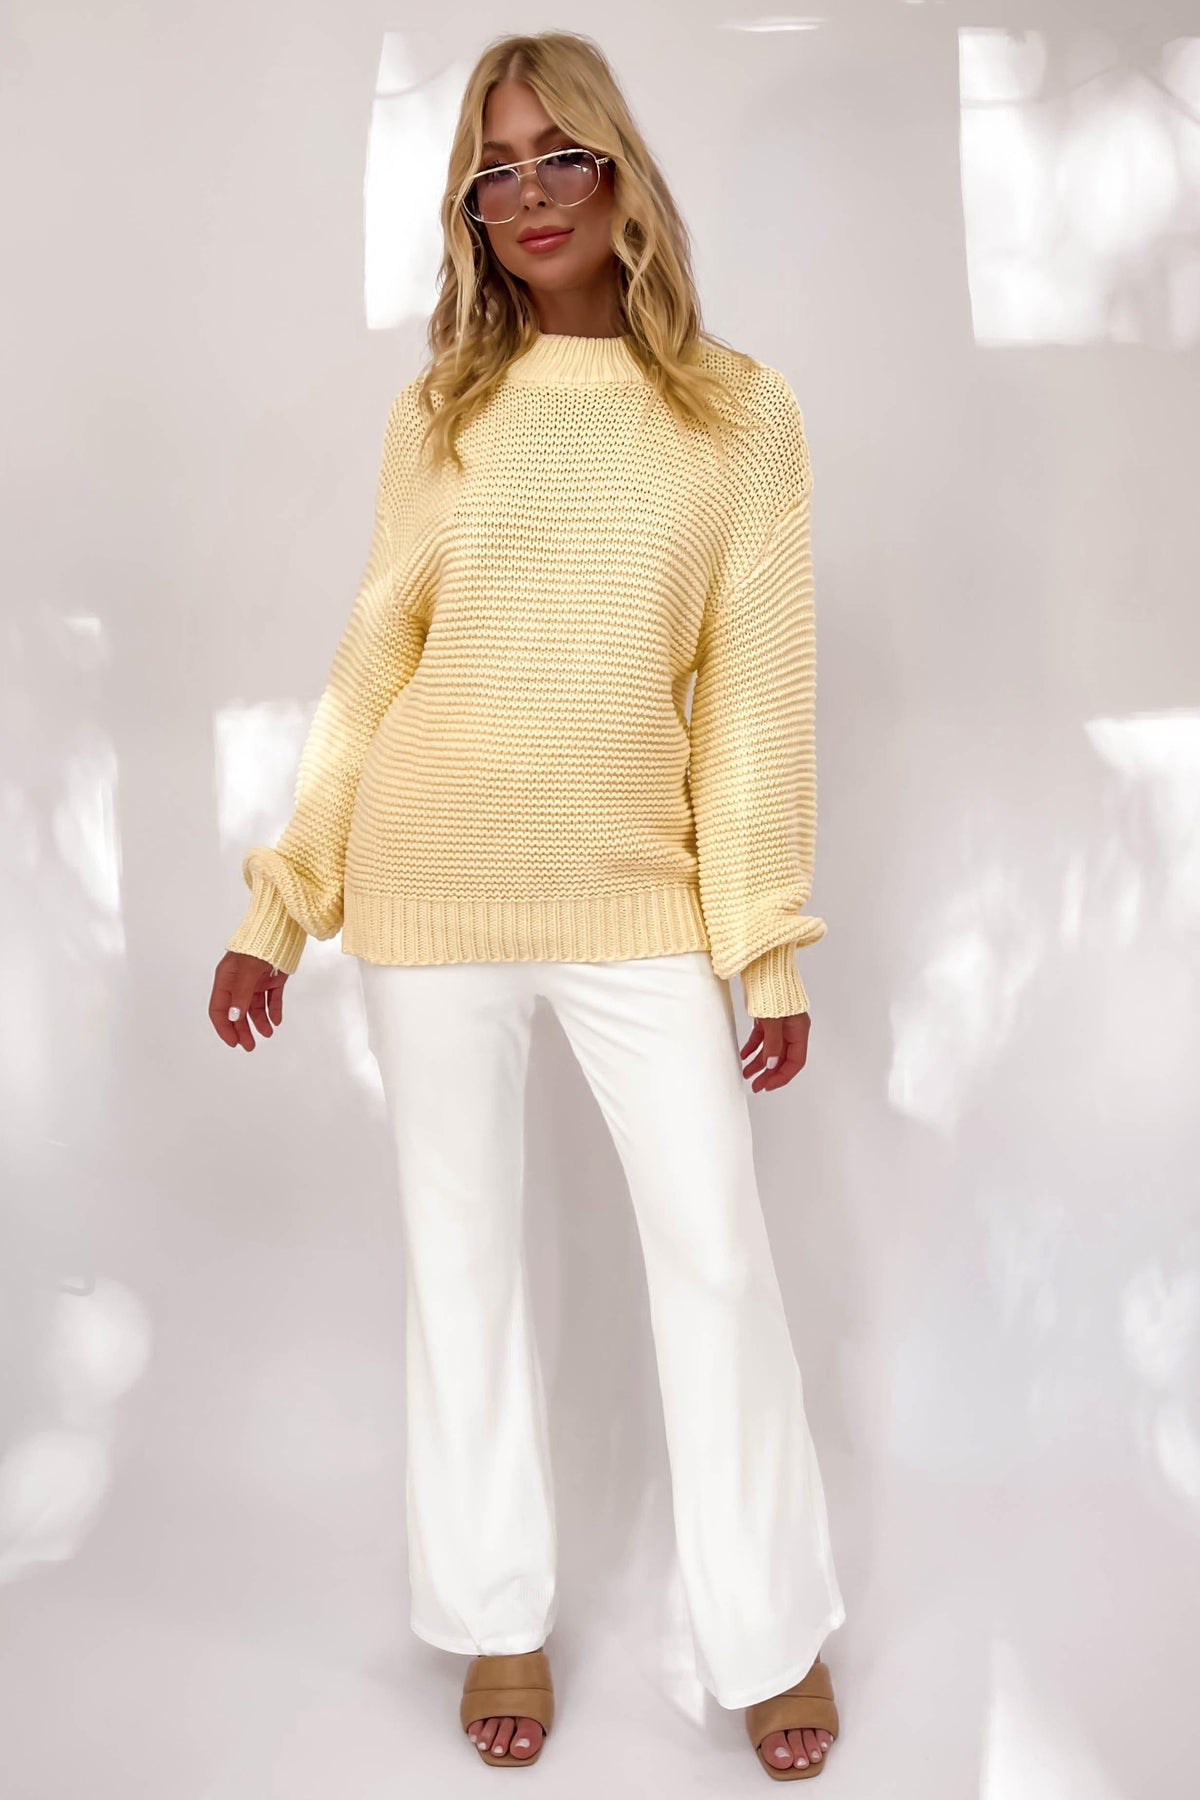 Alicia Top, ACRYLIC &amp; COTTON, ACRYLIC AND COTTON, COTTON &amp; ACRYLIC, COTTON AND ACRYLIC, LONG SLEEVE, new arrivals, YELLOW, , -MISHKAH